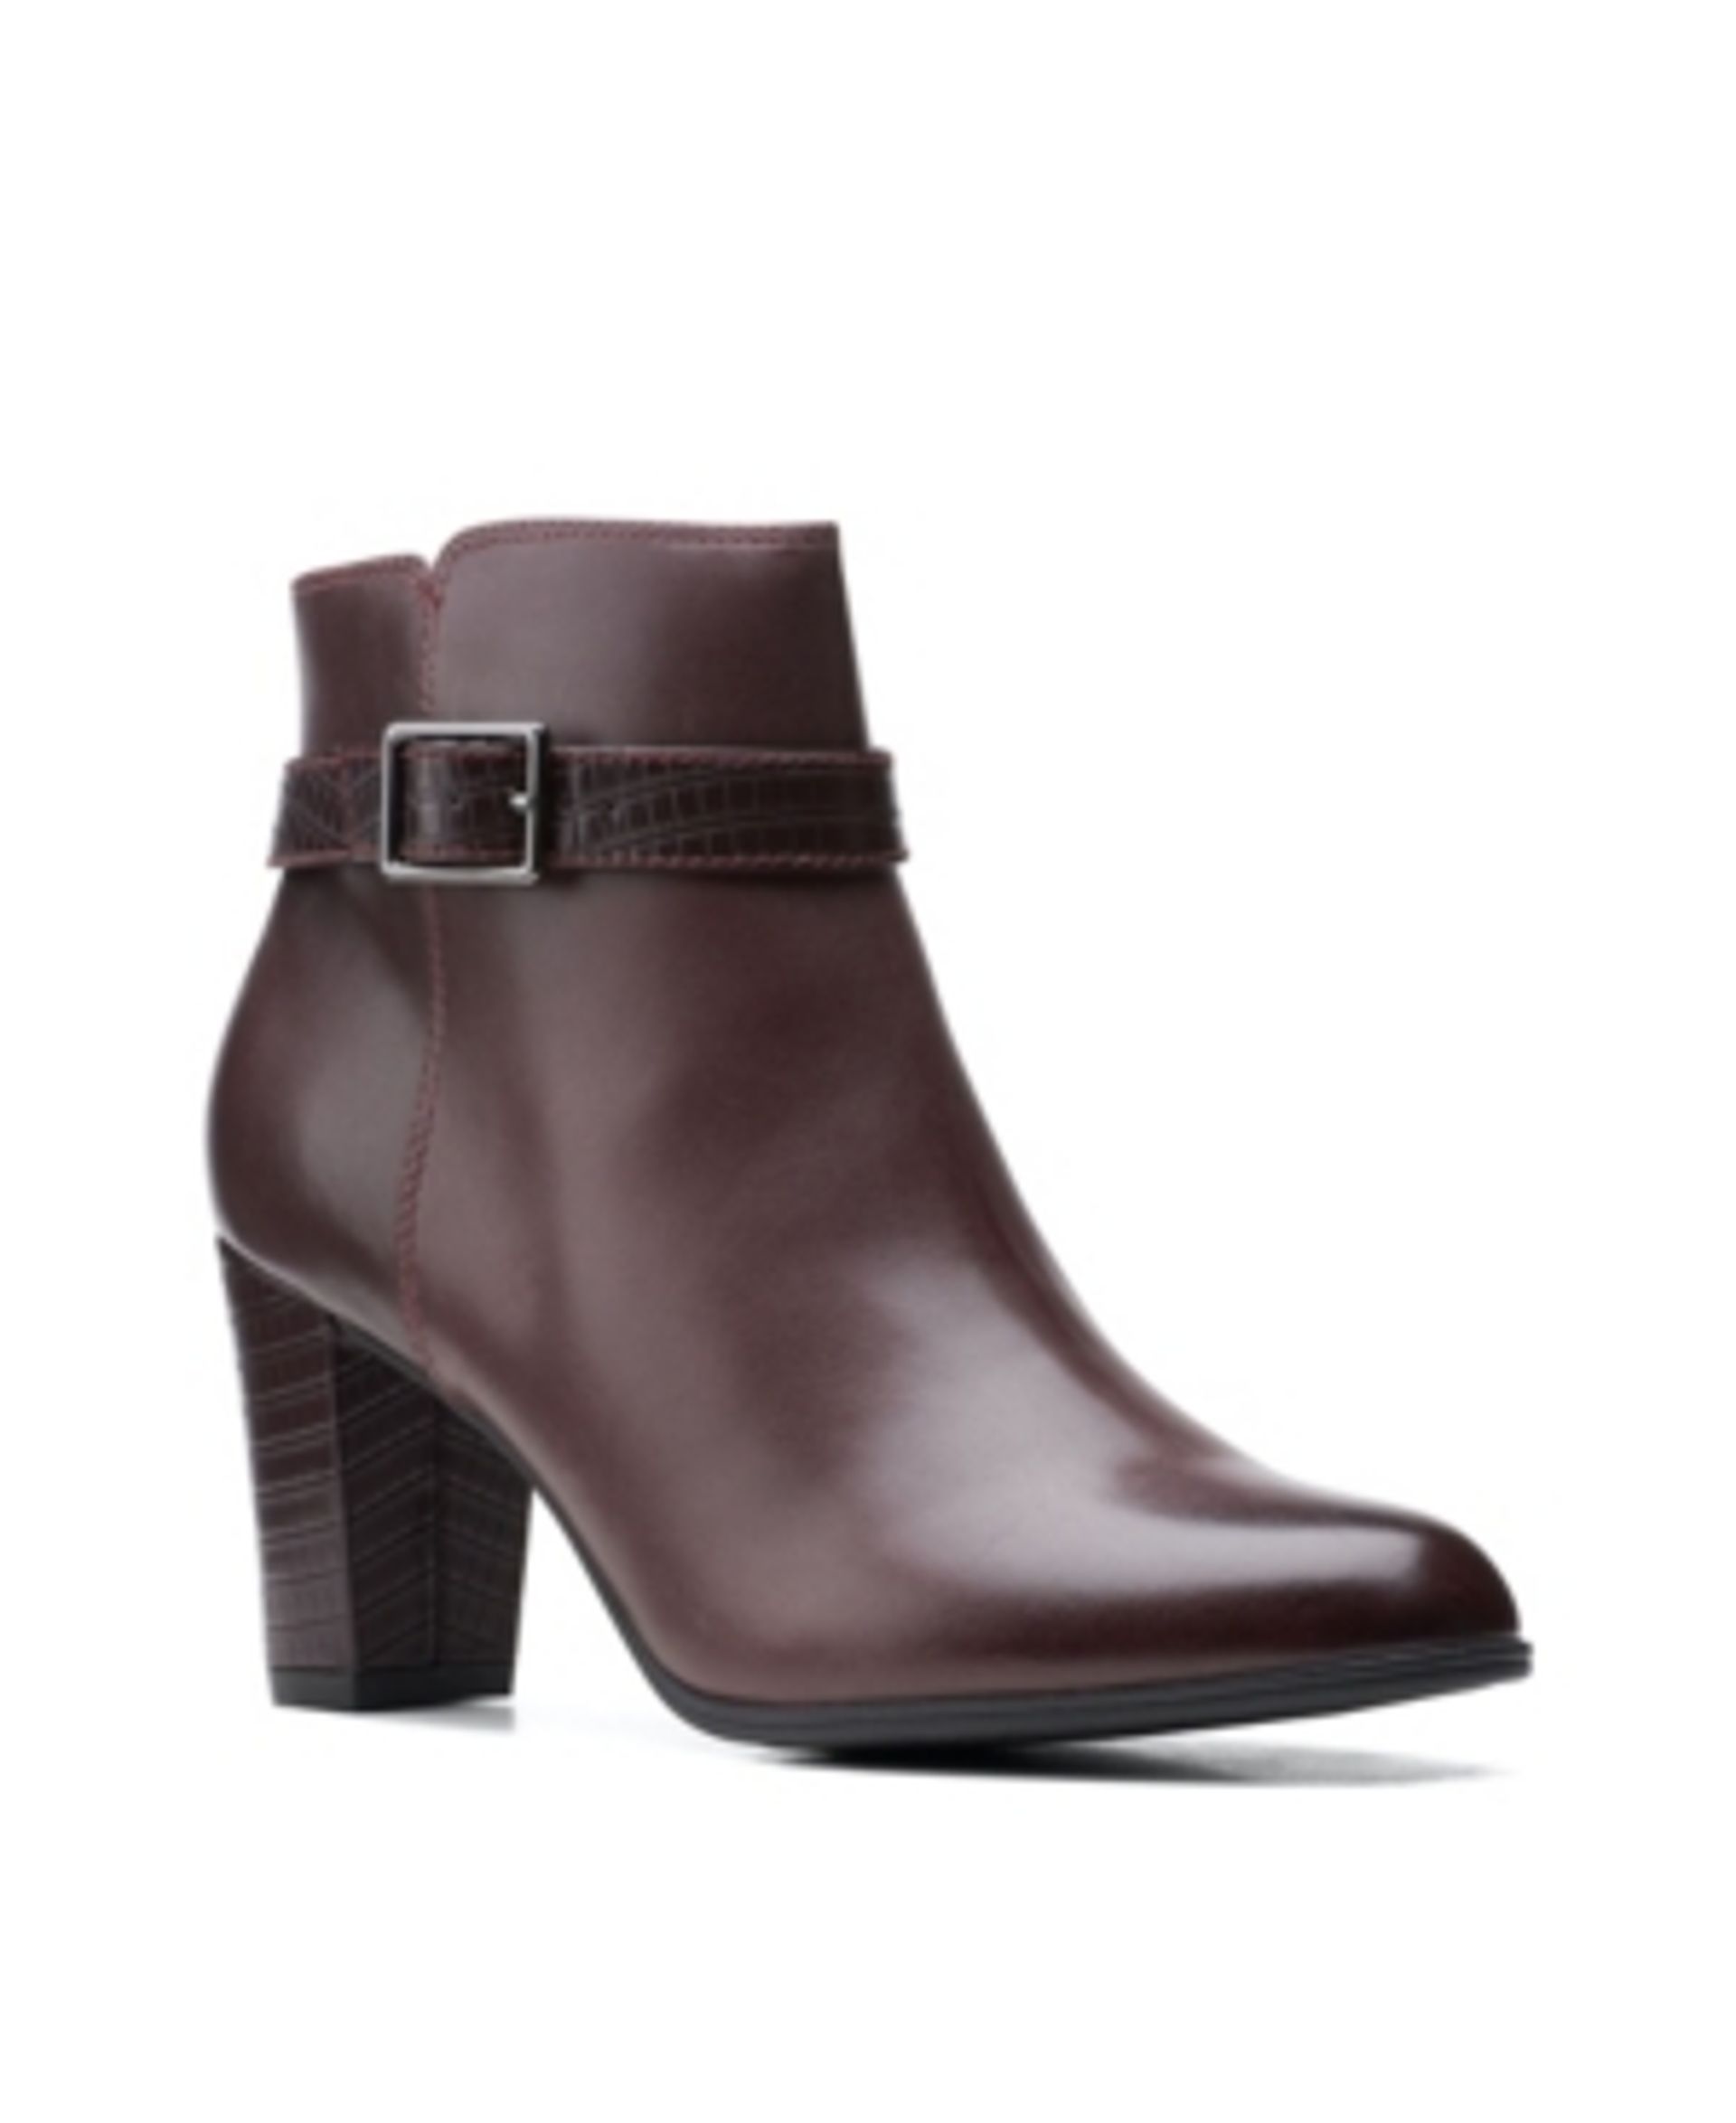 Clarks Collection Women's Alayna Juno 